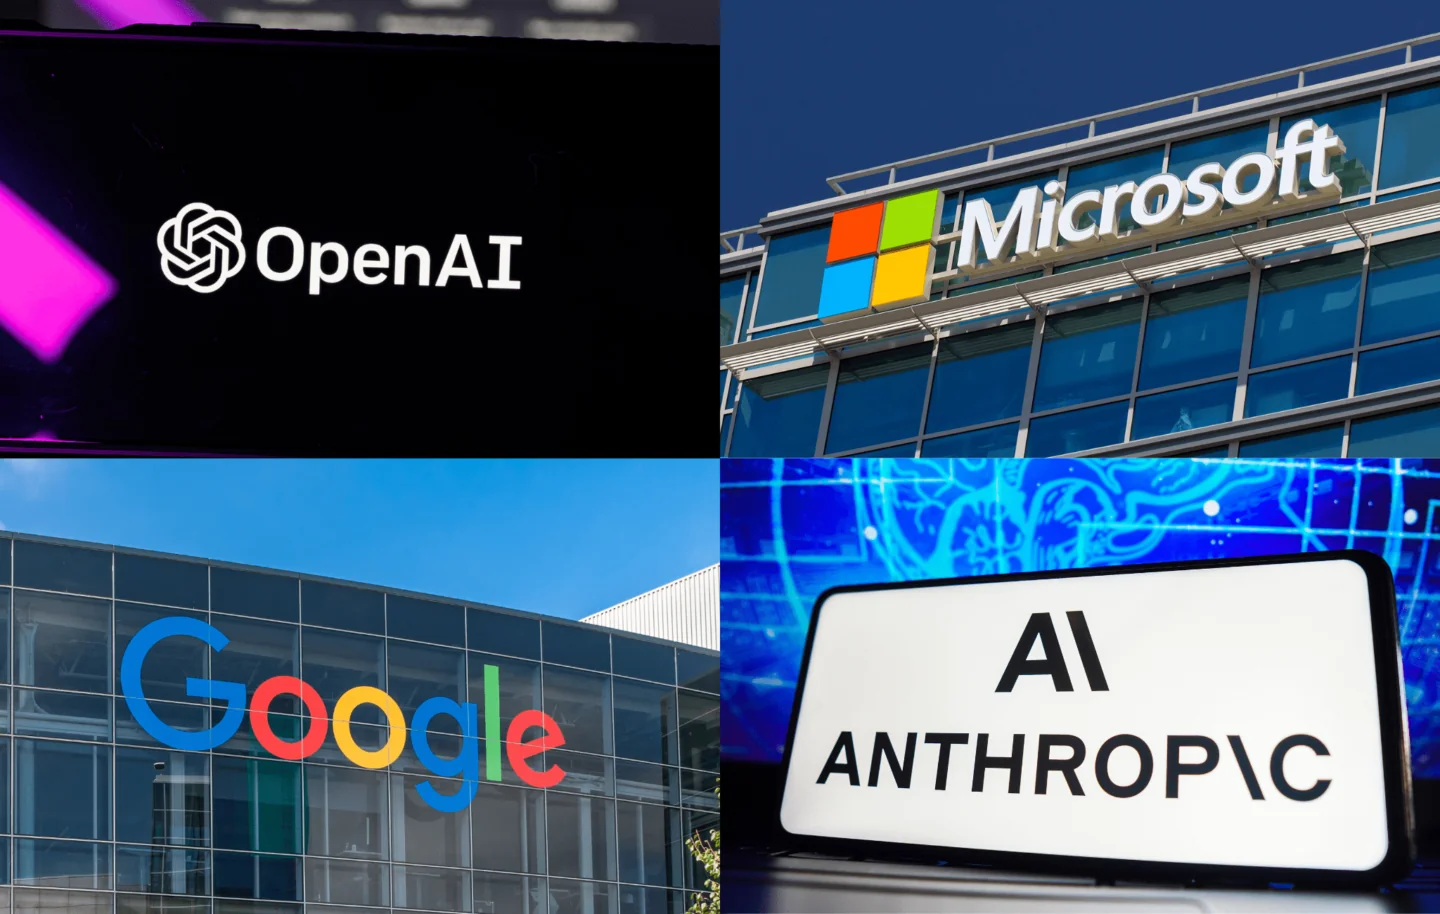 Google-Microsoft-OpenAI-and-Anthropic-to-Form-Industry-Group-1440x914.png.webp